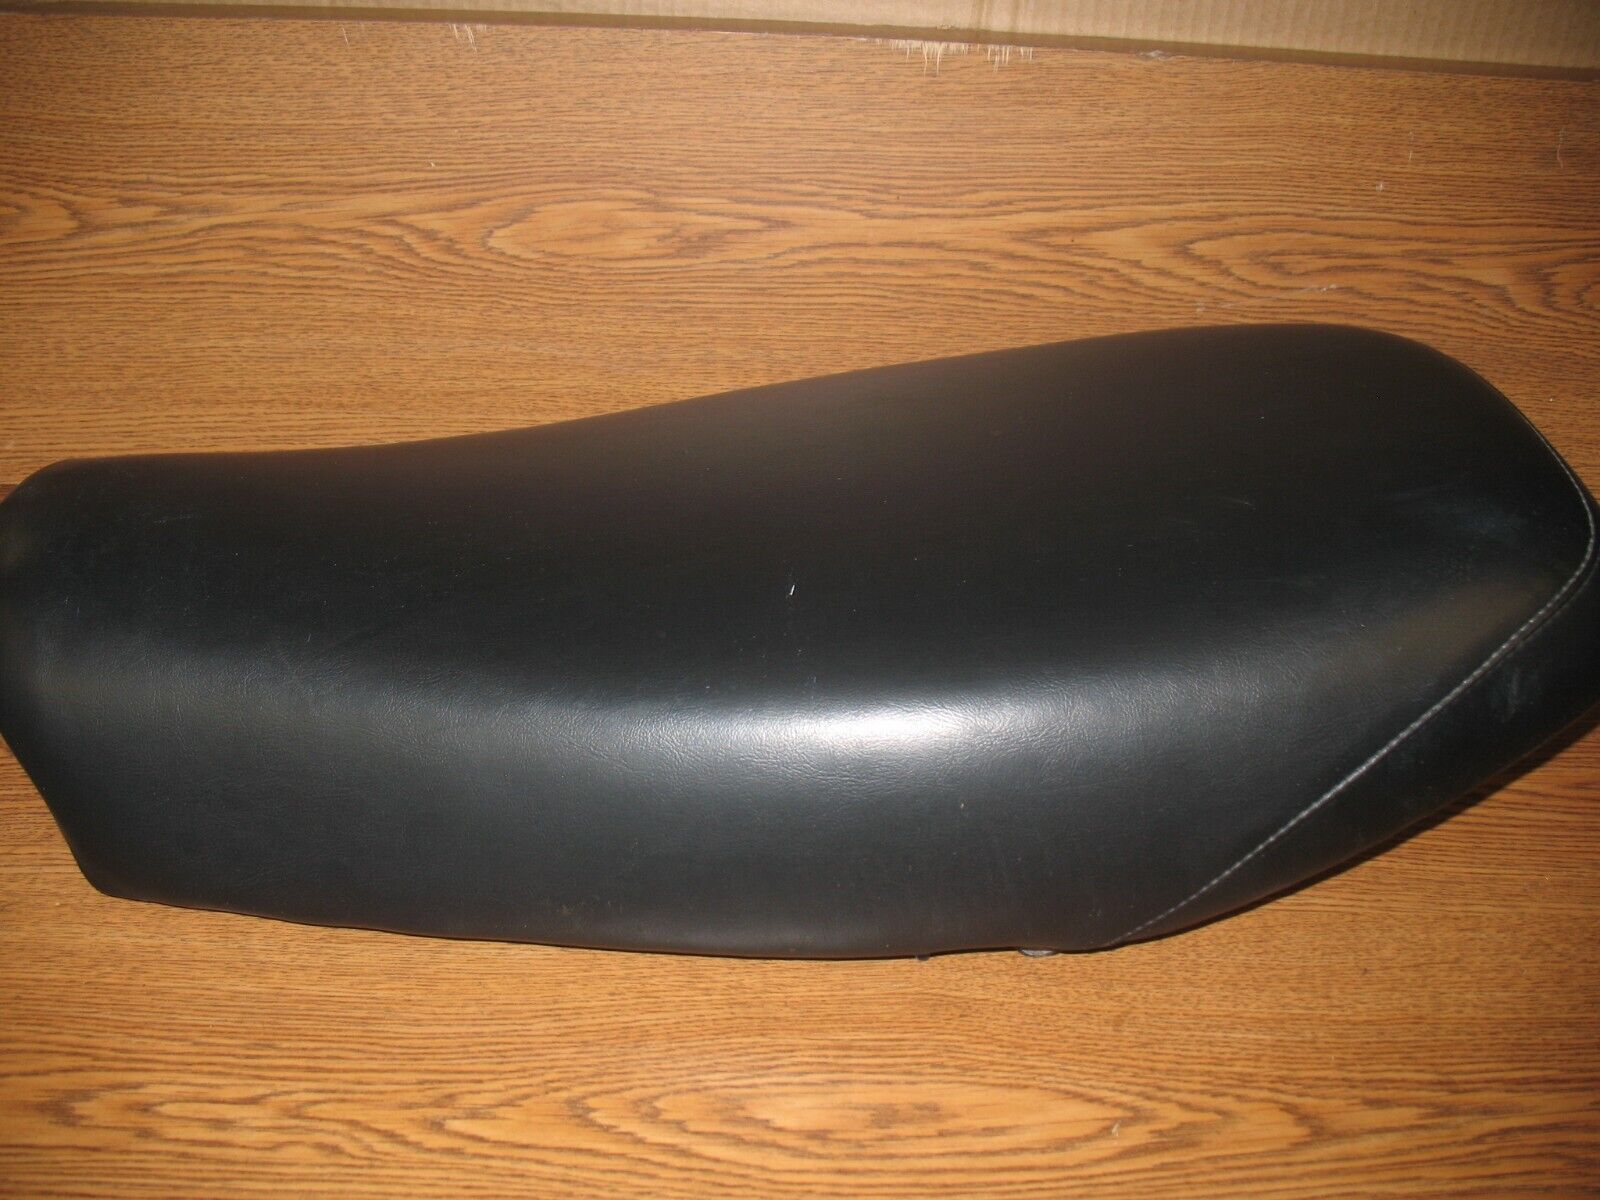 1978 SP370 SEAT ASSEMBLY NICE COVER SUZUKI SP 370 400 1978-1980 45100-32400-48F